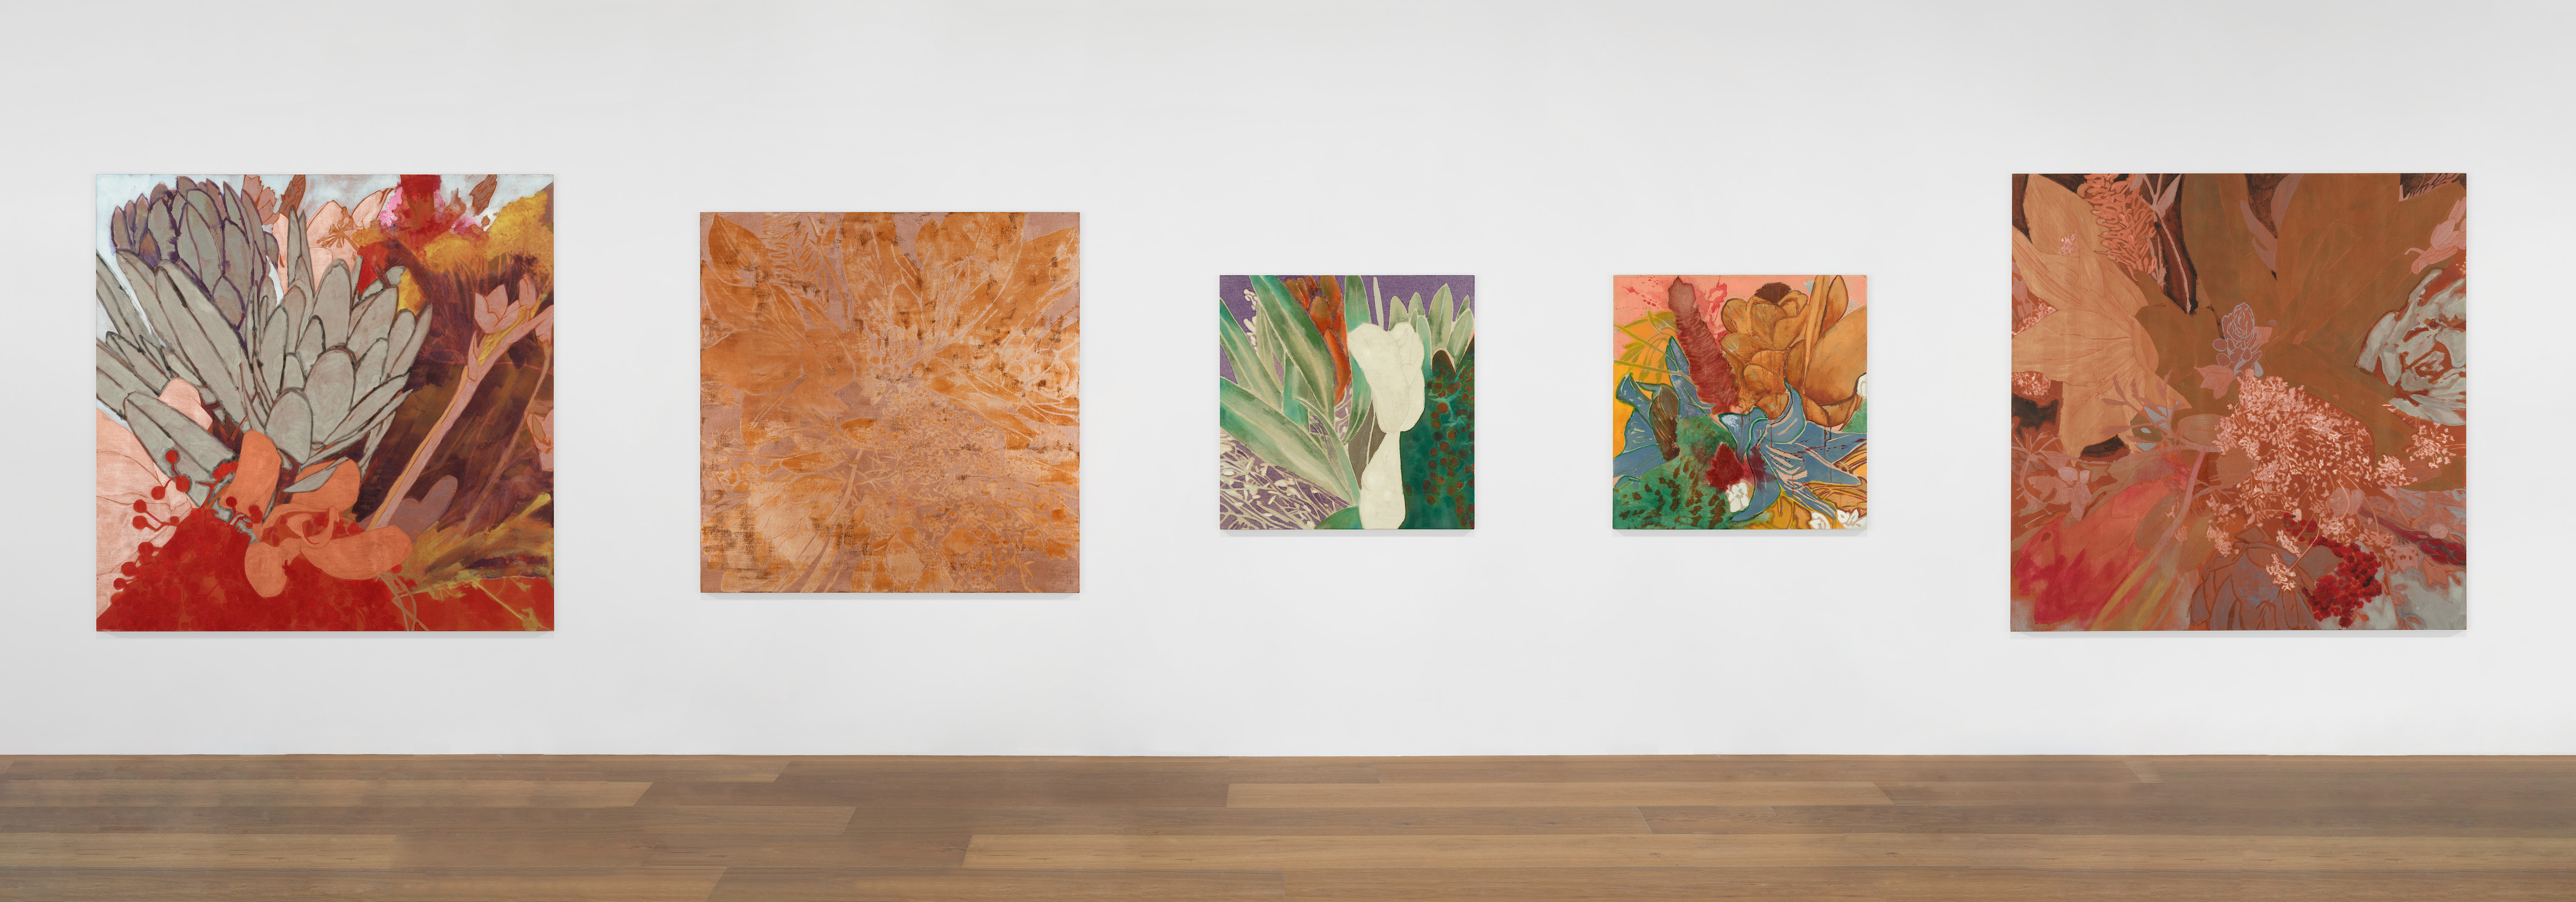 Installation view of five of Francesco Clemente's Winter Flowers paintings